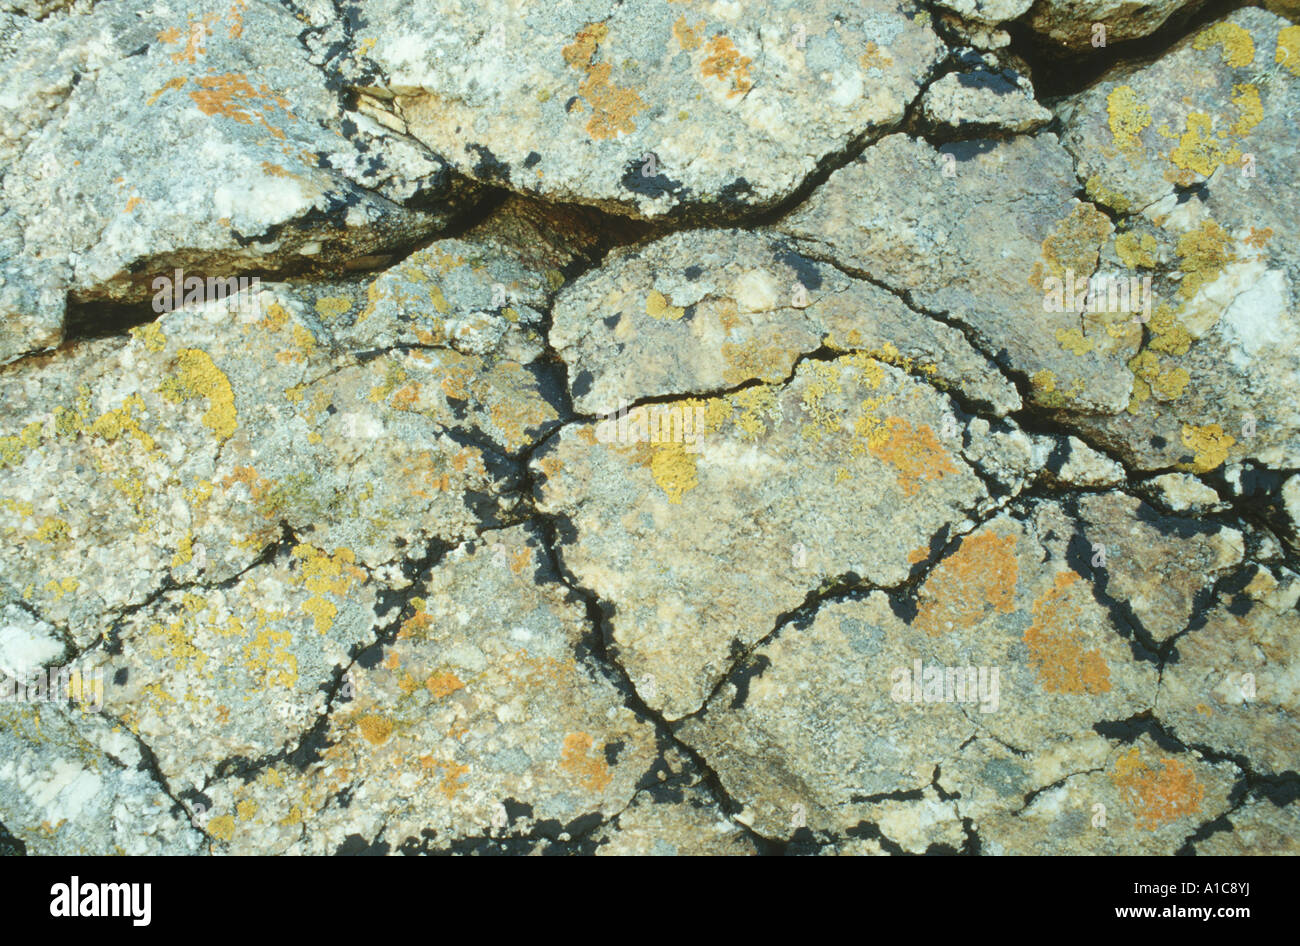 Lichens on rock, France Stock Photo